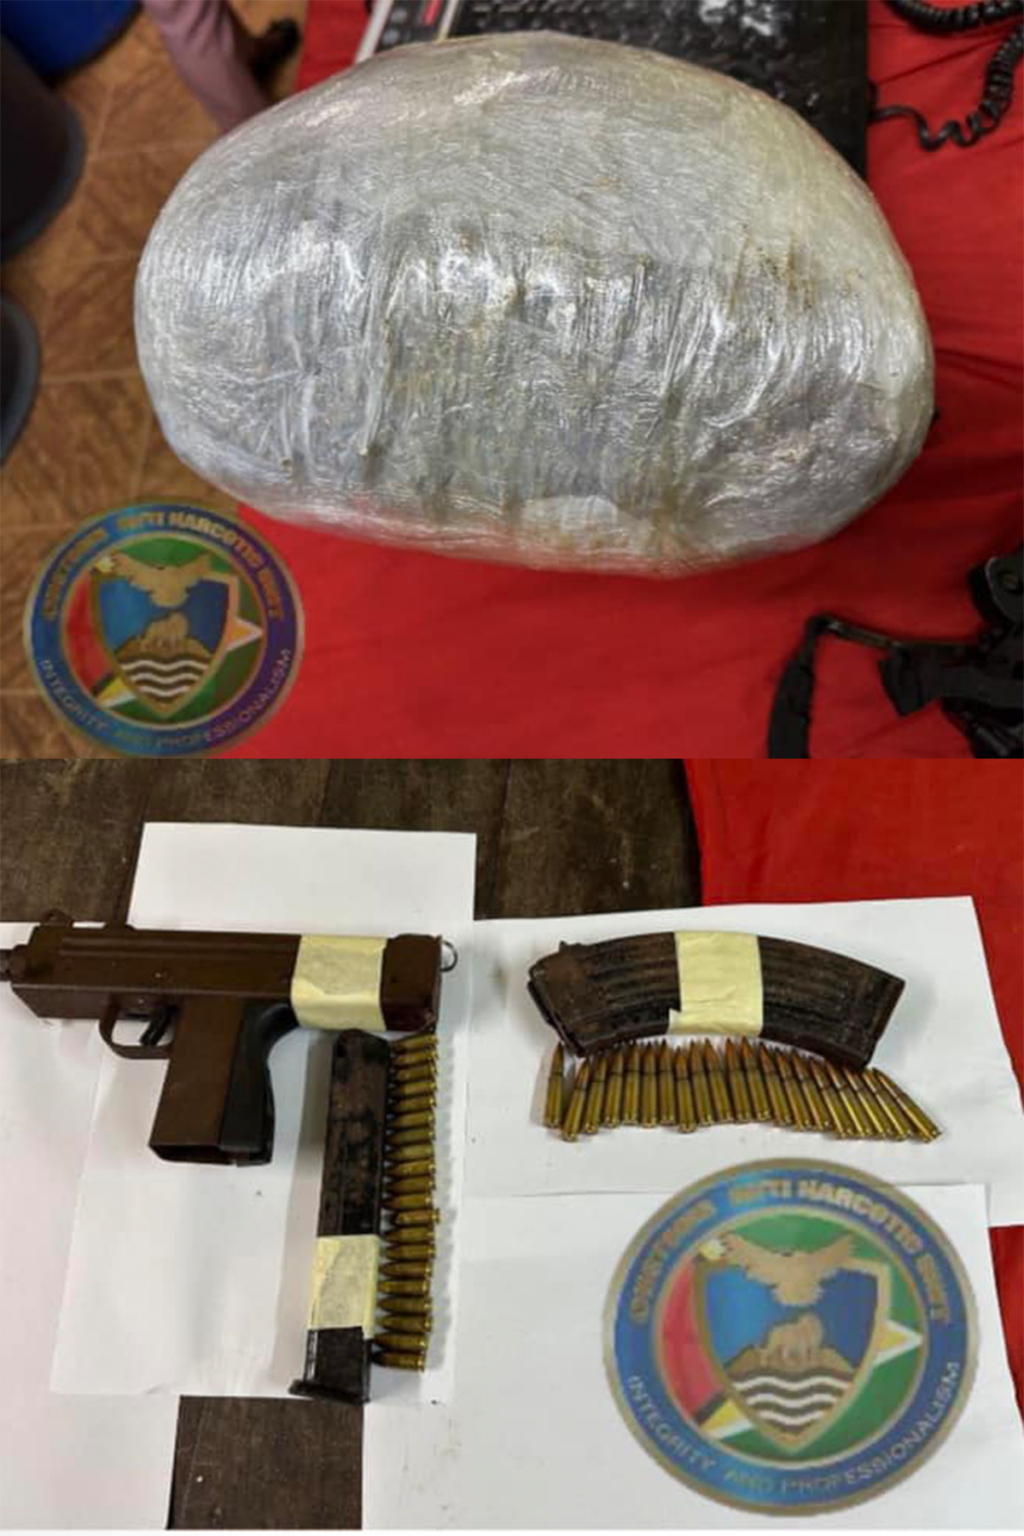 On 29th April 2024, CANU Officers discovered a 9mm sub-machine gun, AK-47 magazine, and a parcel containing suspected cannabis. The firearm, ammunition, and narcotic were taken to CANU's headquarters.  The suspected cannabis tested positive for cannabis and weighed 2.494 kgs. Investigations are ongoing.